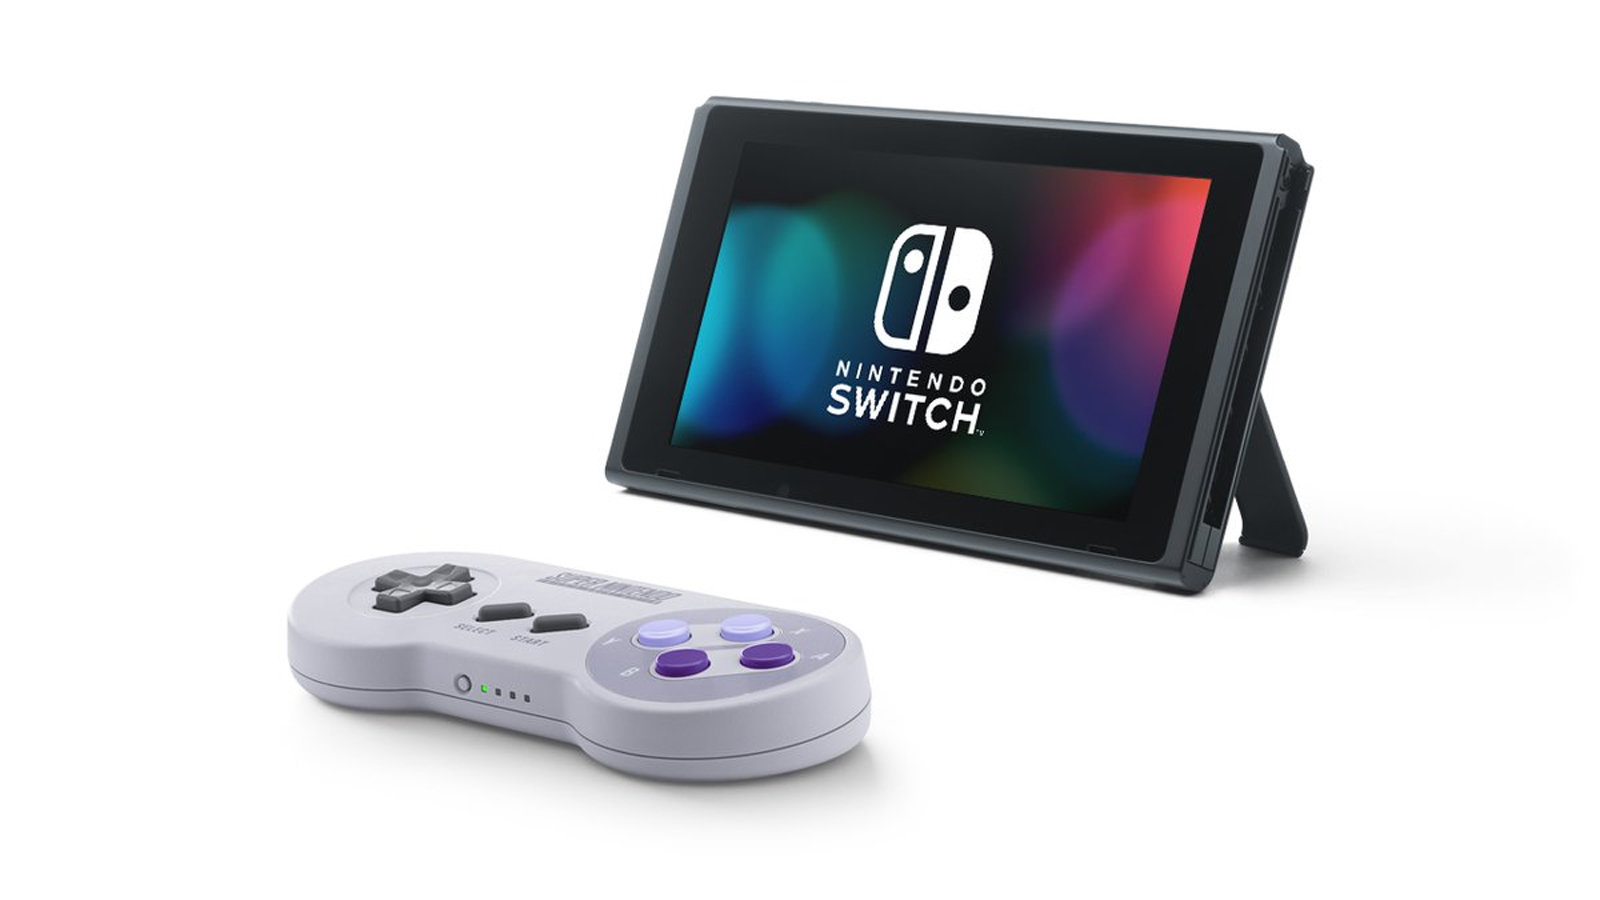 Nintendo's SNES-style Switch controllers are now available | DeviceDaily.com